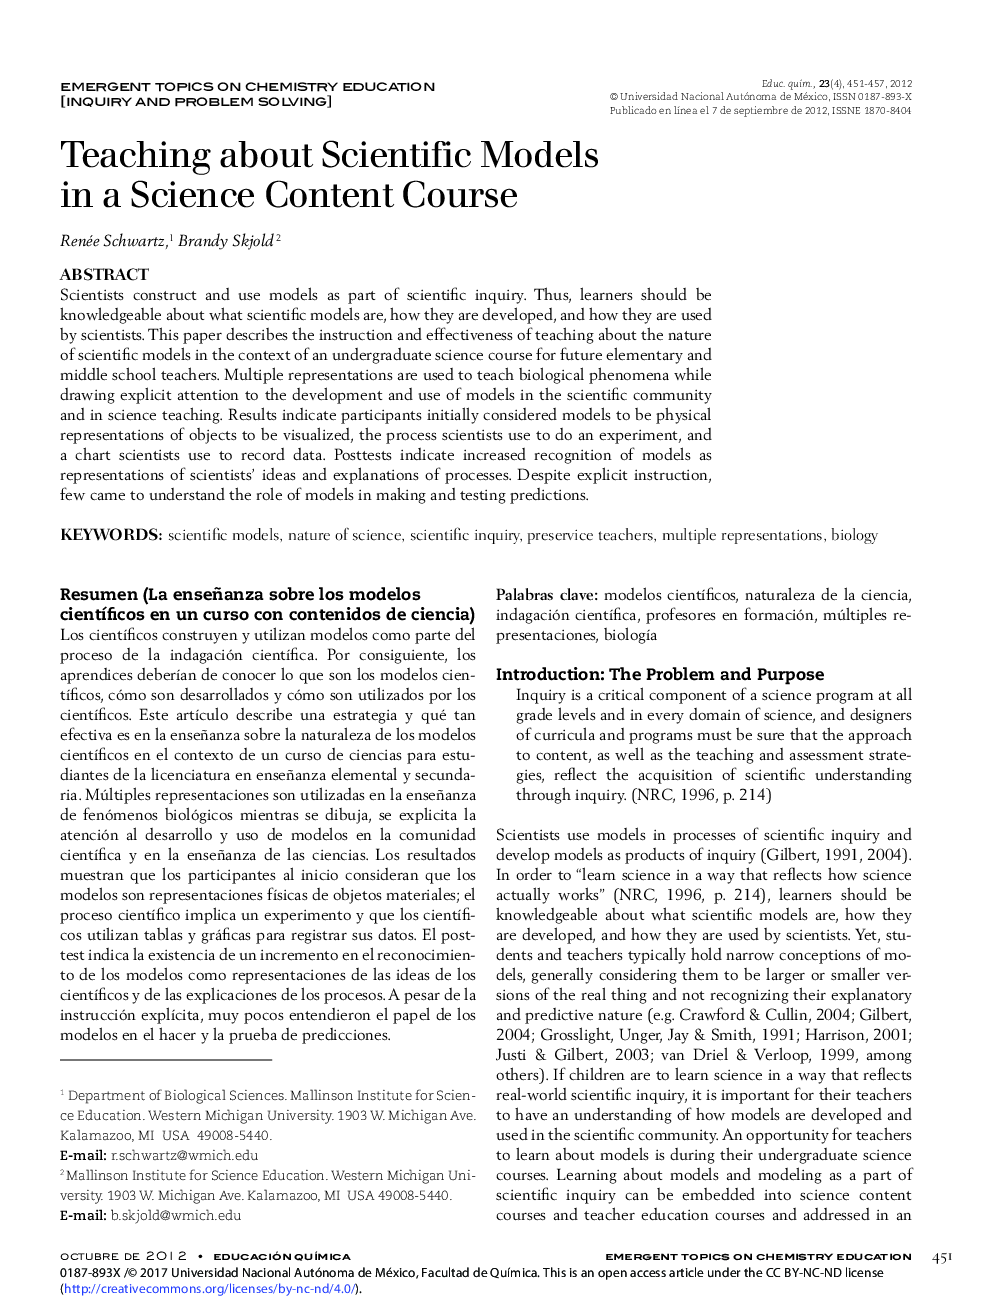 Teaching about Scientific Models in a Science Content Course